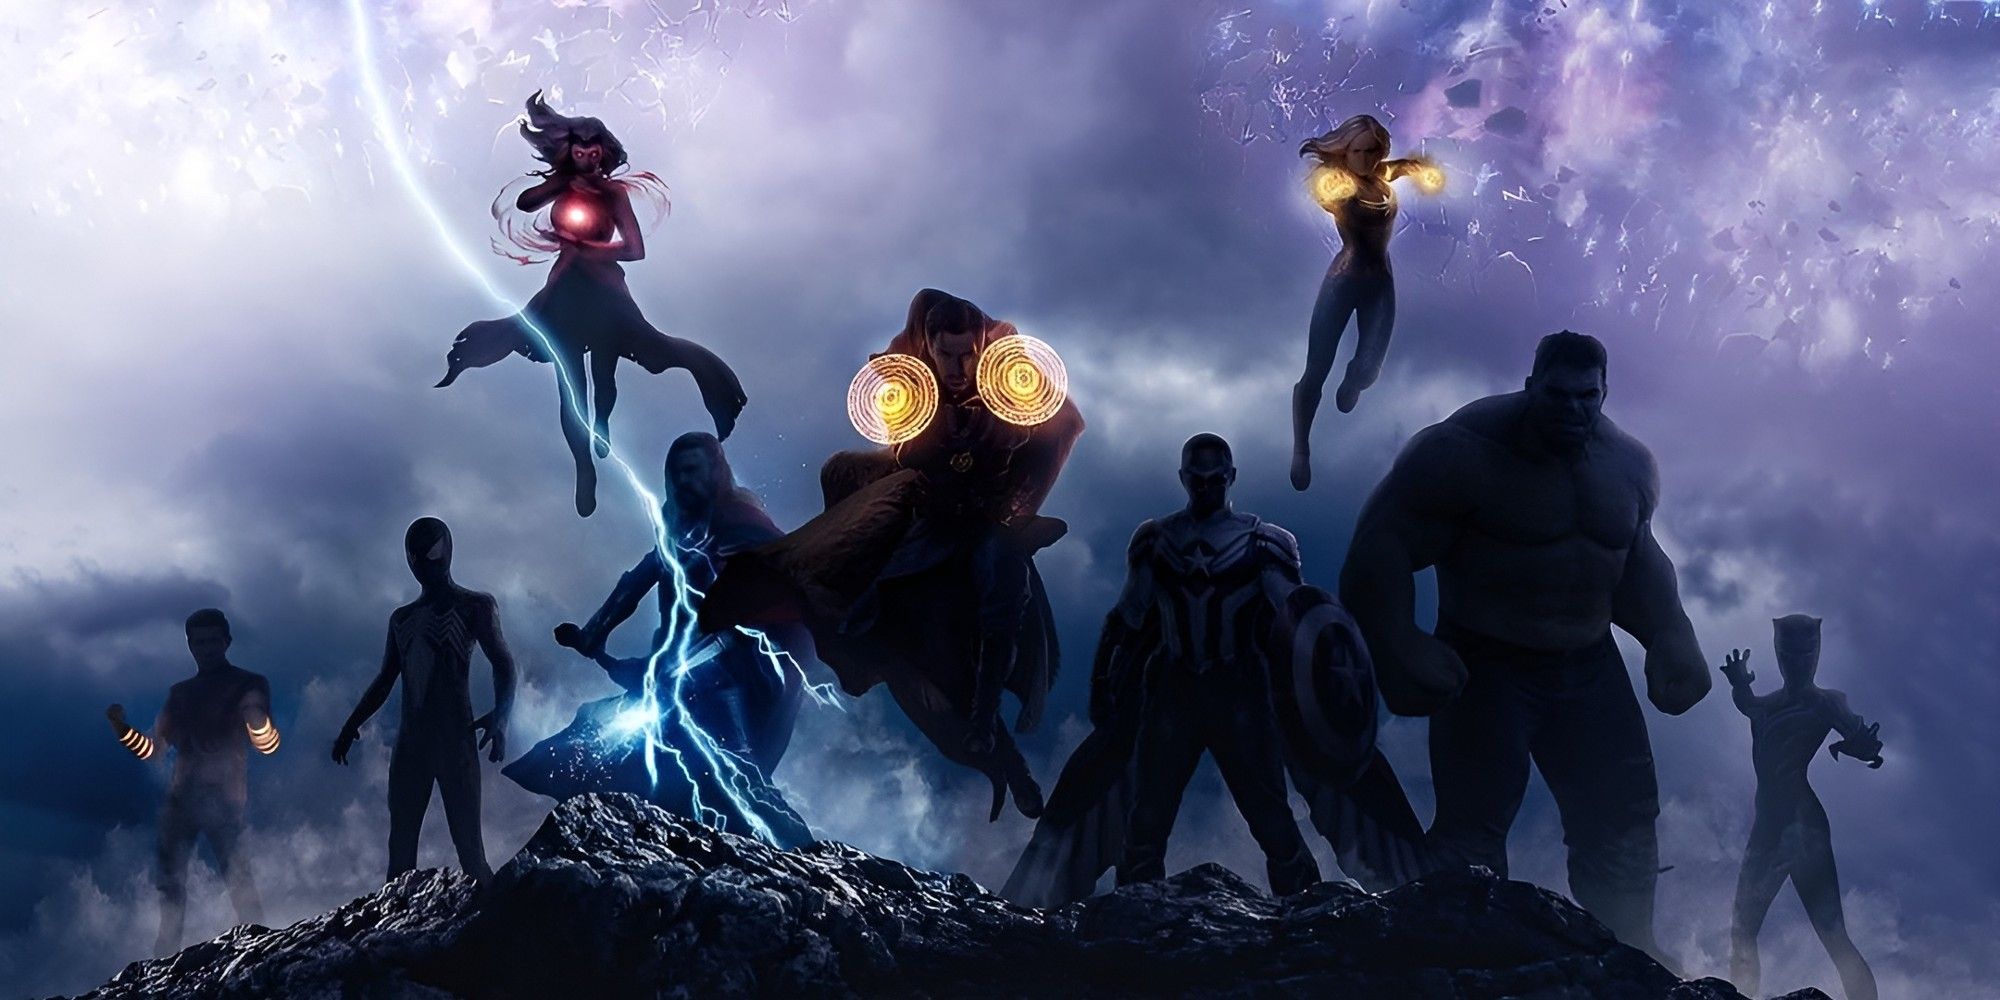 Fan poster for Avengers: Secret Wars showing the new version of the team, with the characters involved by shadows.